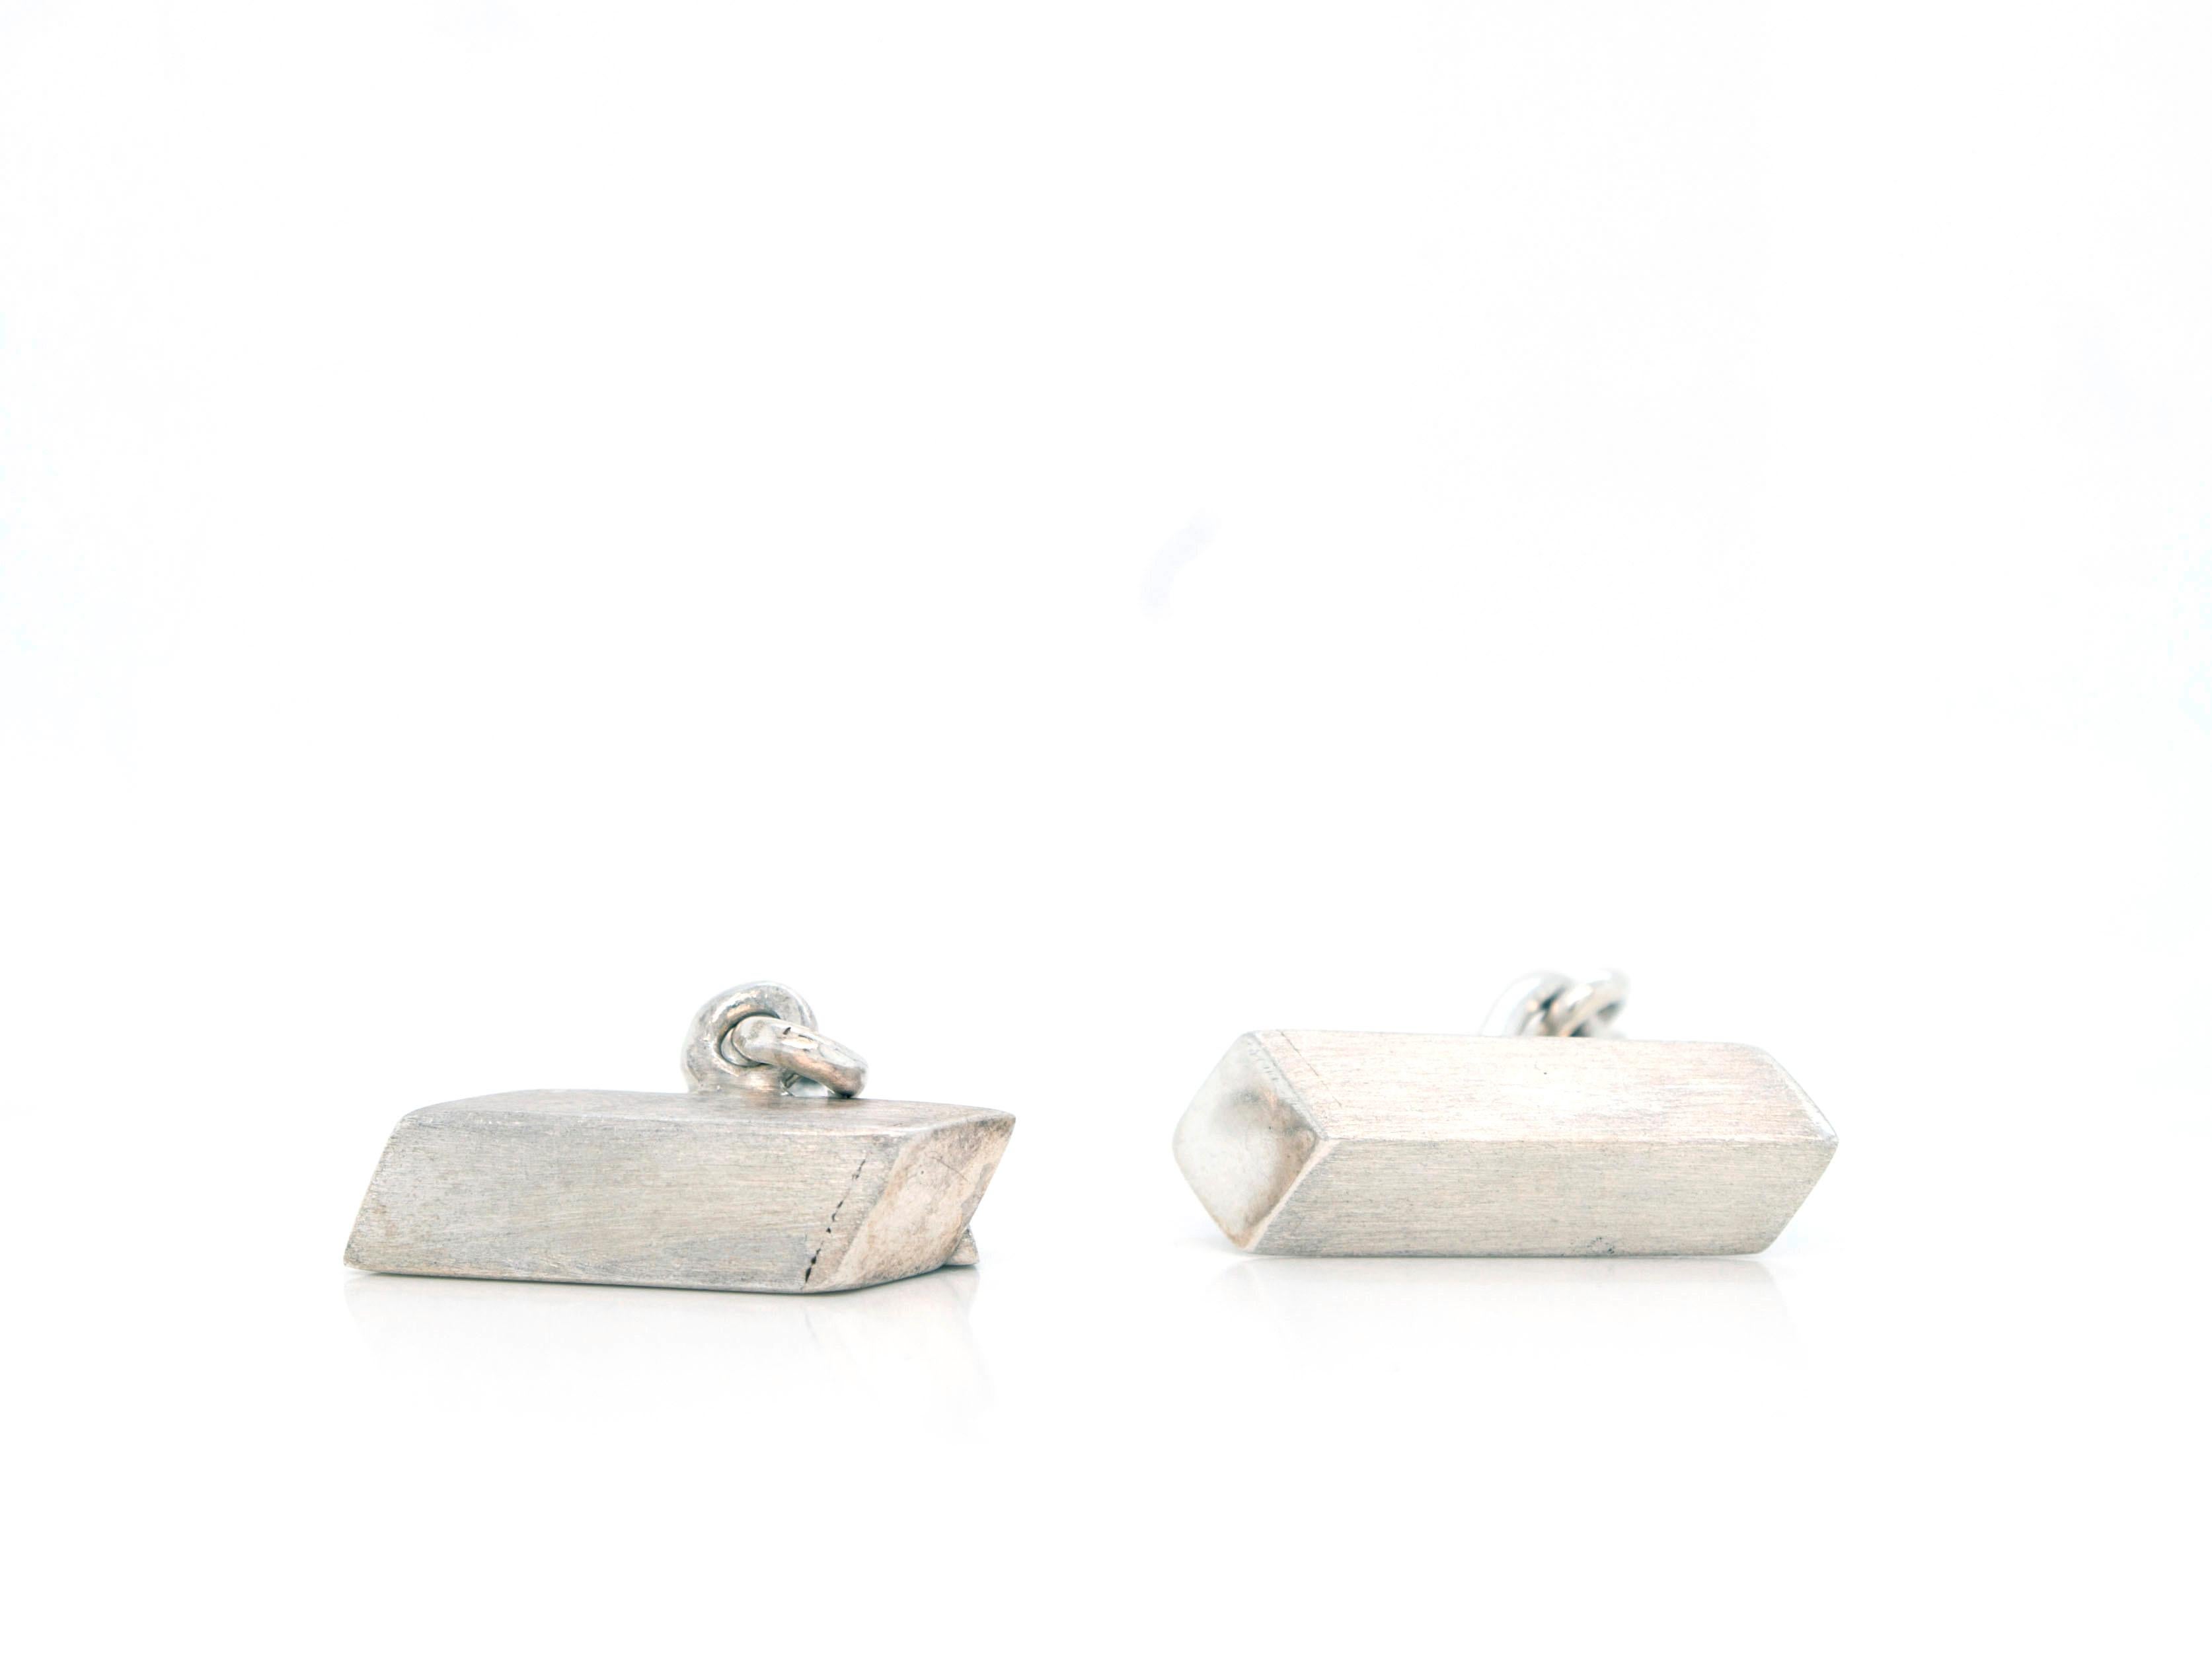 Faye Kim Sterling Silver Trapezoid Cufflinks

Finish off your formal look with these handcrafted Sterling Silver cufflinks.  Elegant and sophisticated modern look with a matte finish.

Lenght x Width: 1